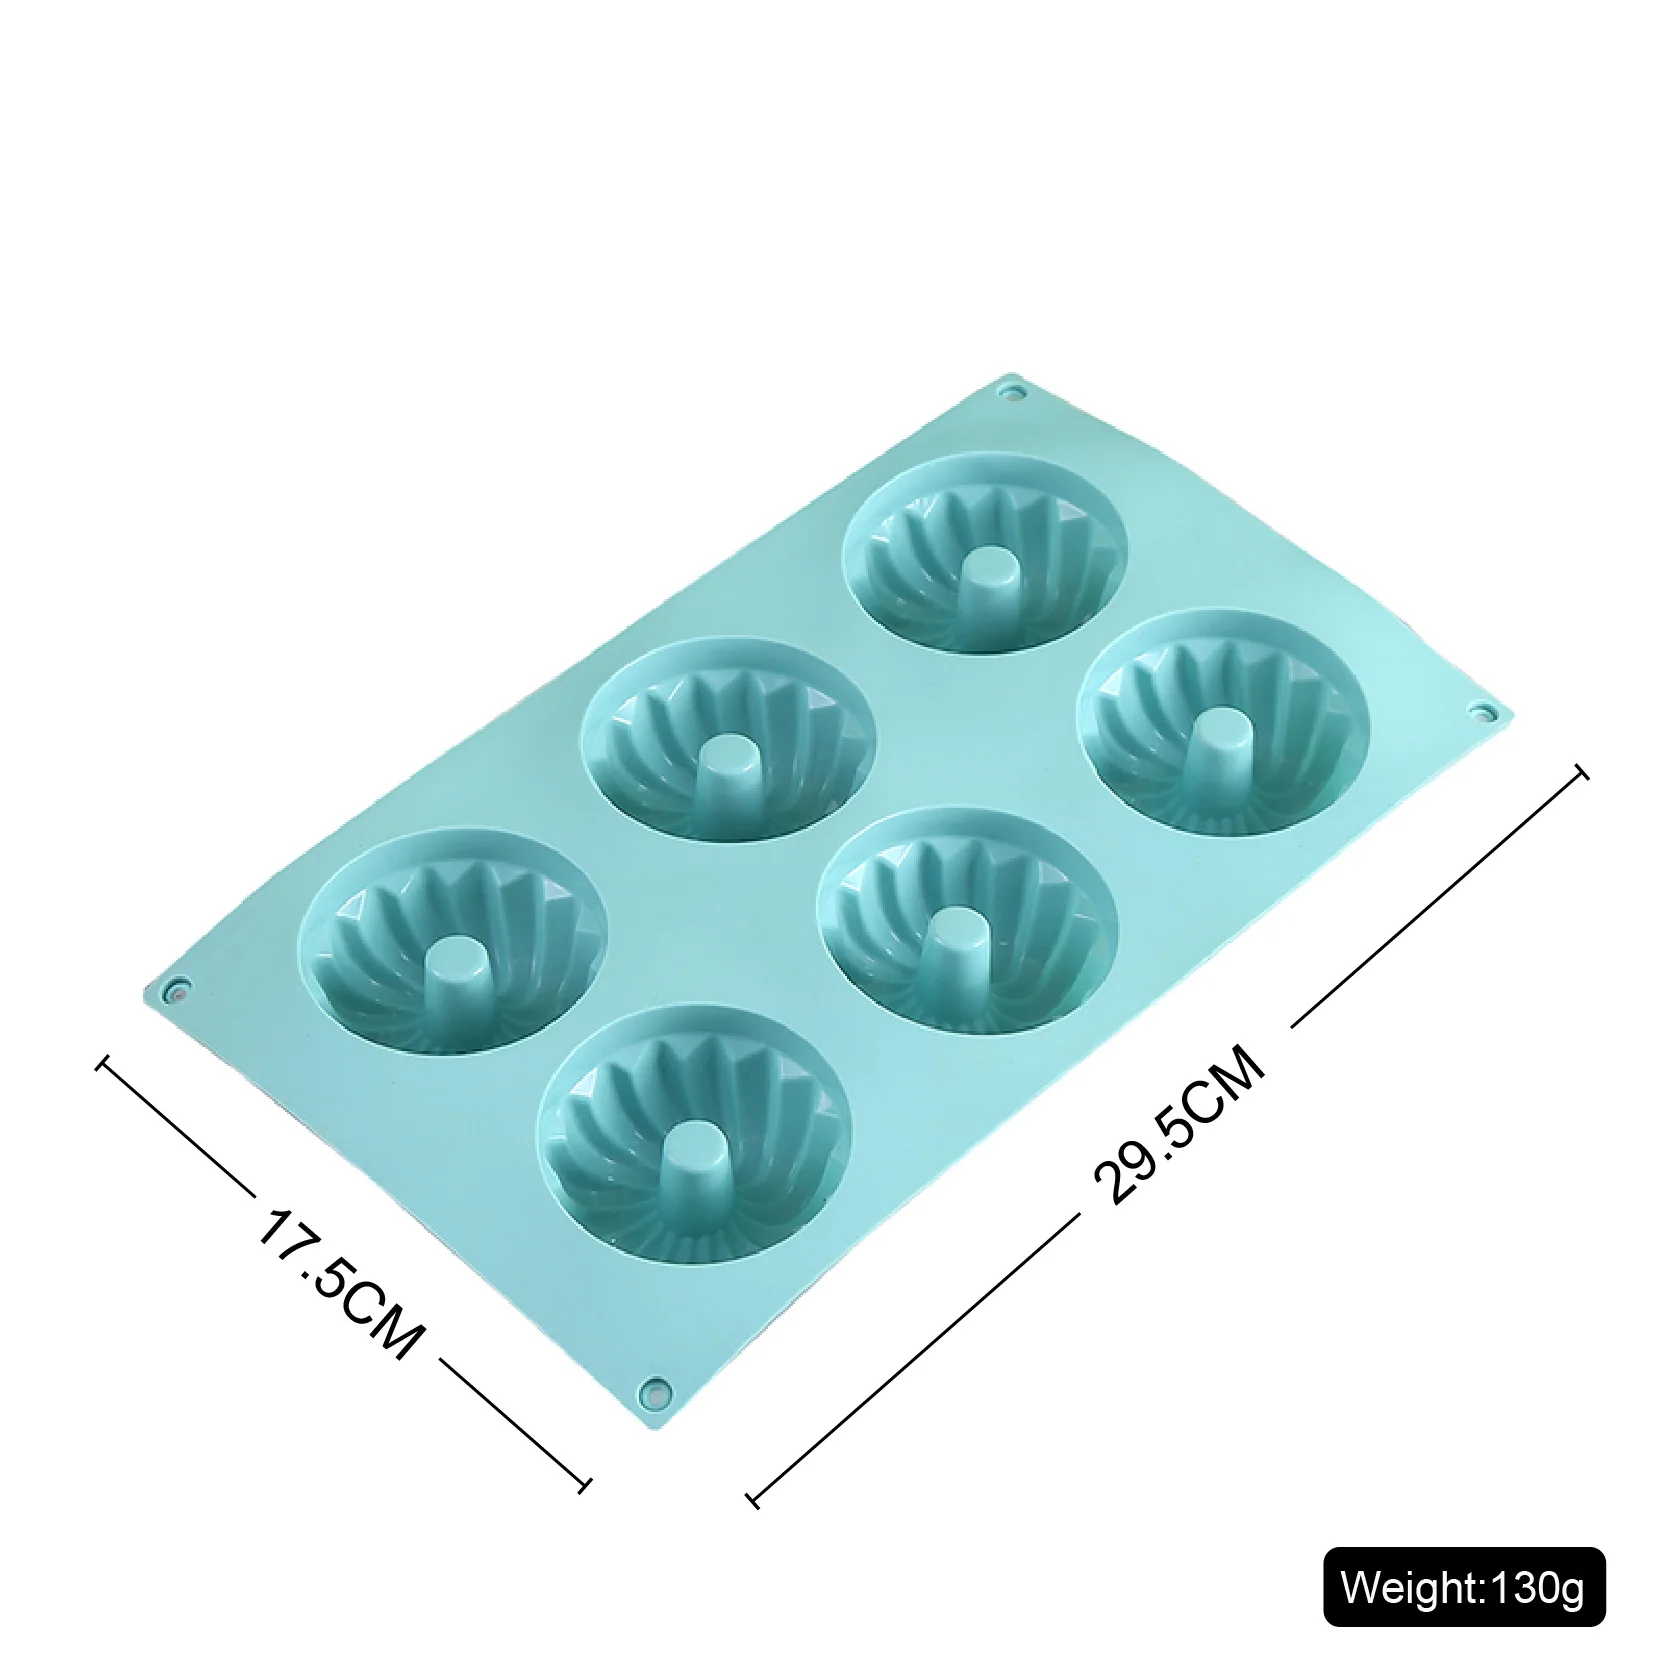 6 Cavity Donut Silicone Molds for Soap Cake Chocolate Cornbread Muffins Chocolate Ice Cubes Microwave Cake Making Mold